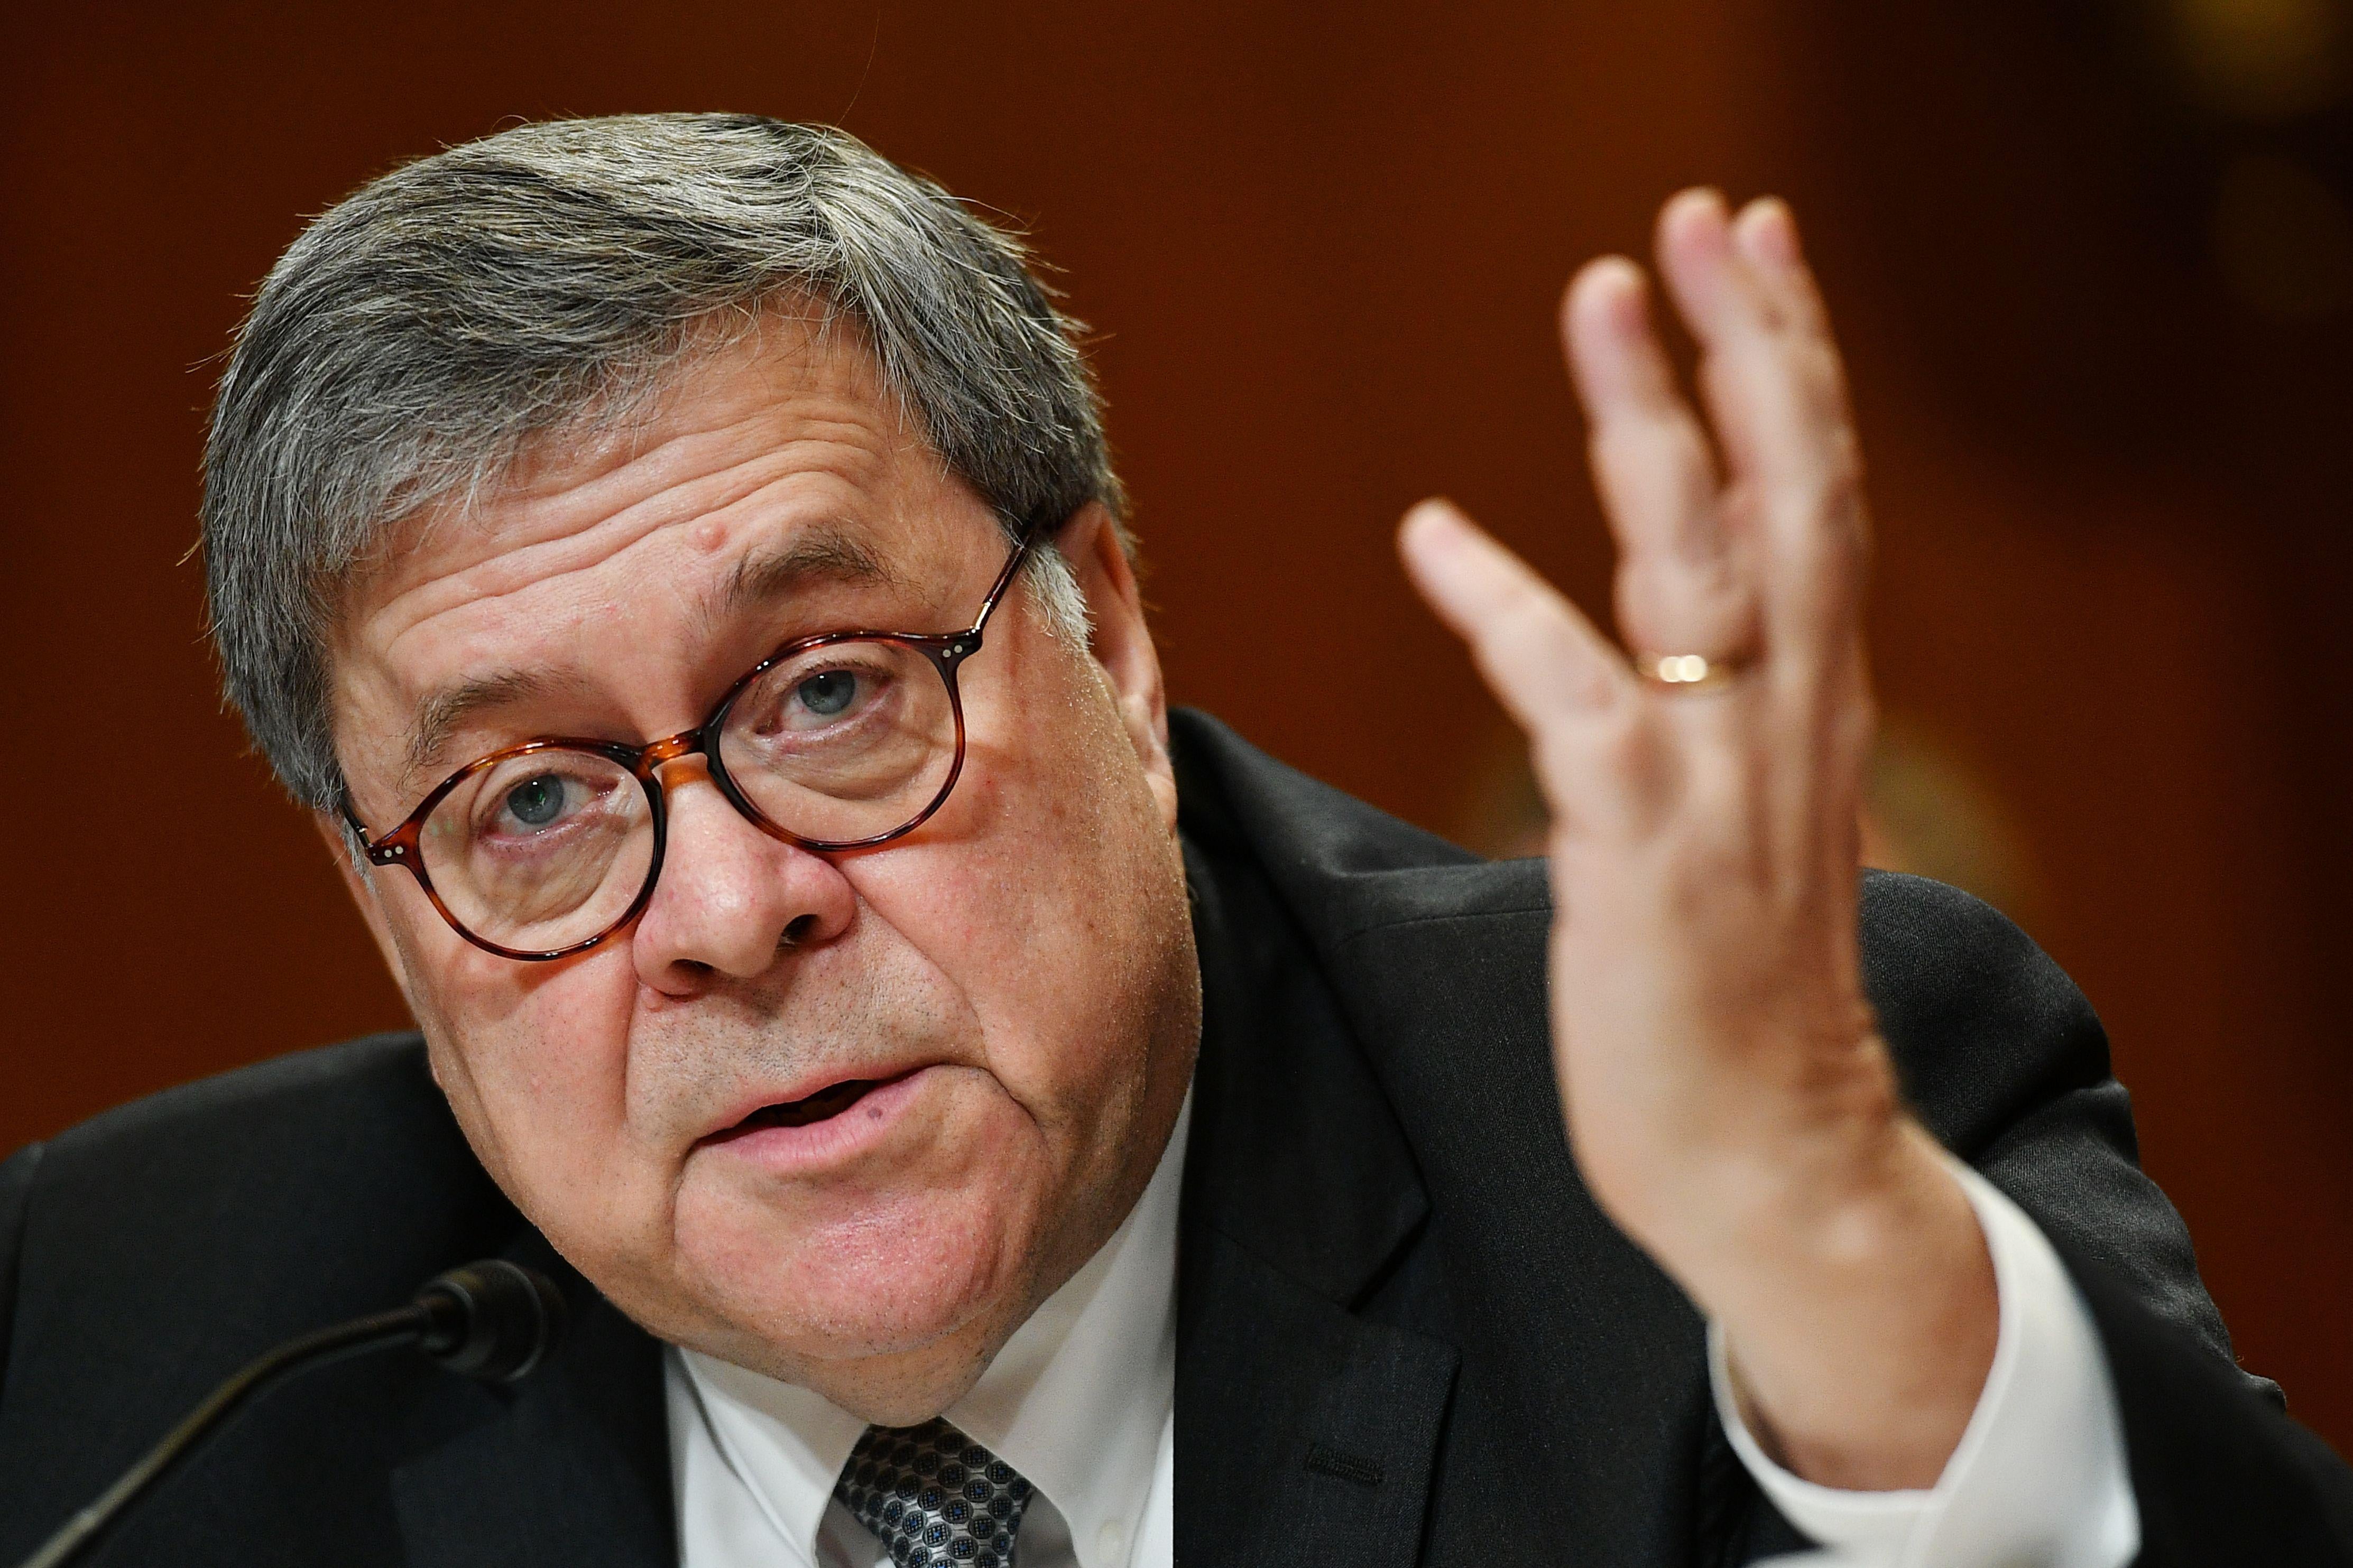 Attorney General William Barr testifies on Capitol Hill in Washington, DC, April 10, 2019.